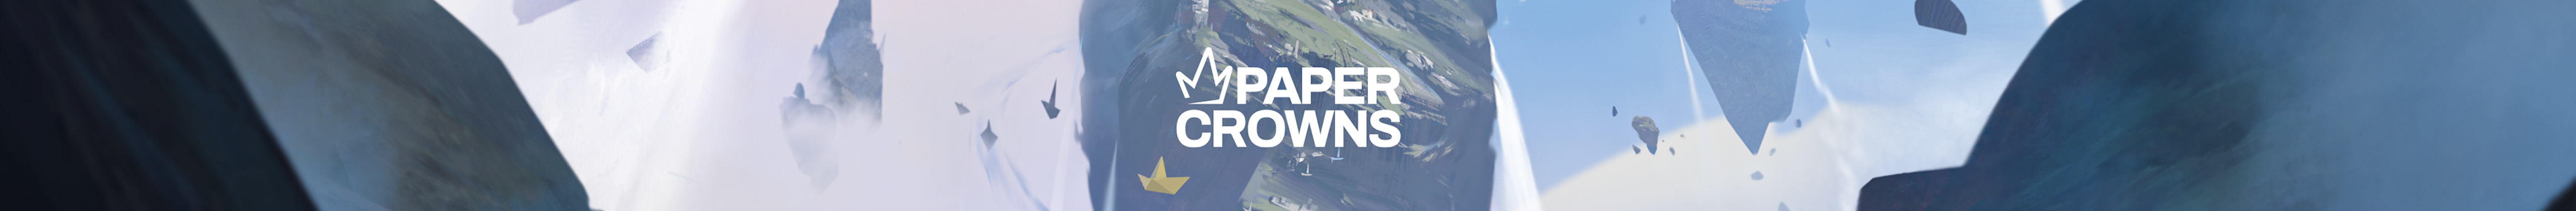 Paper Crowns's profile banner